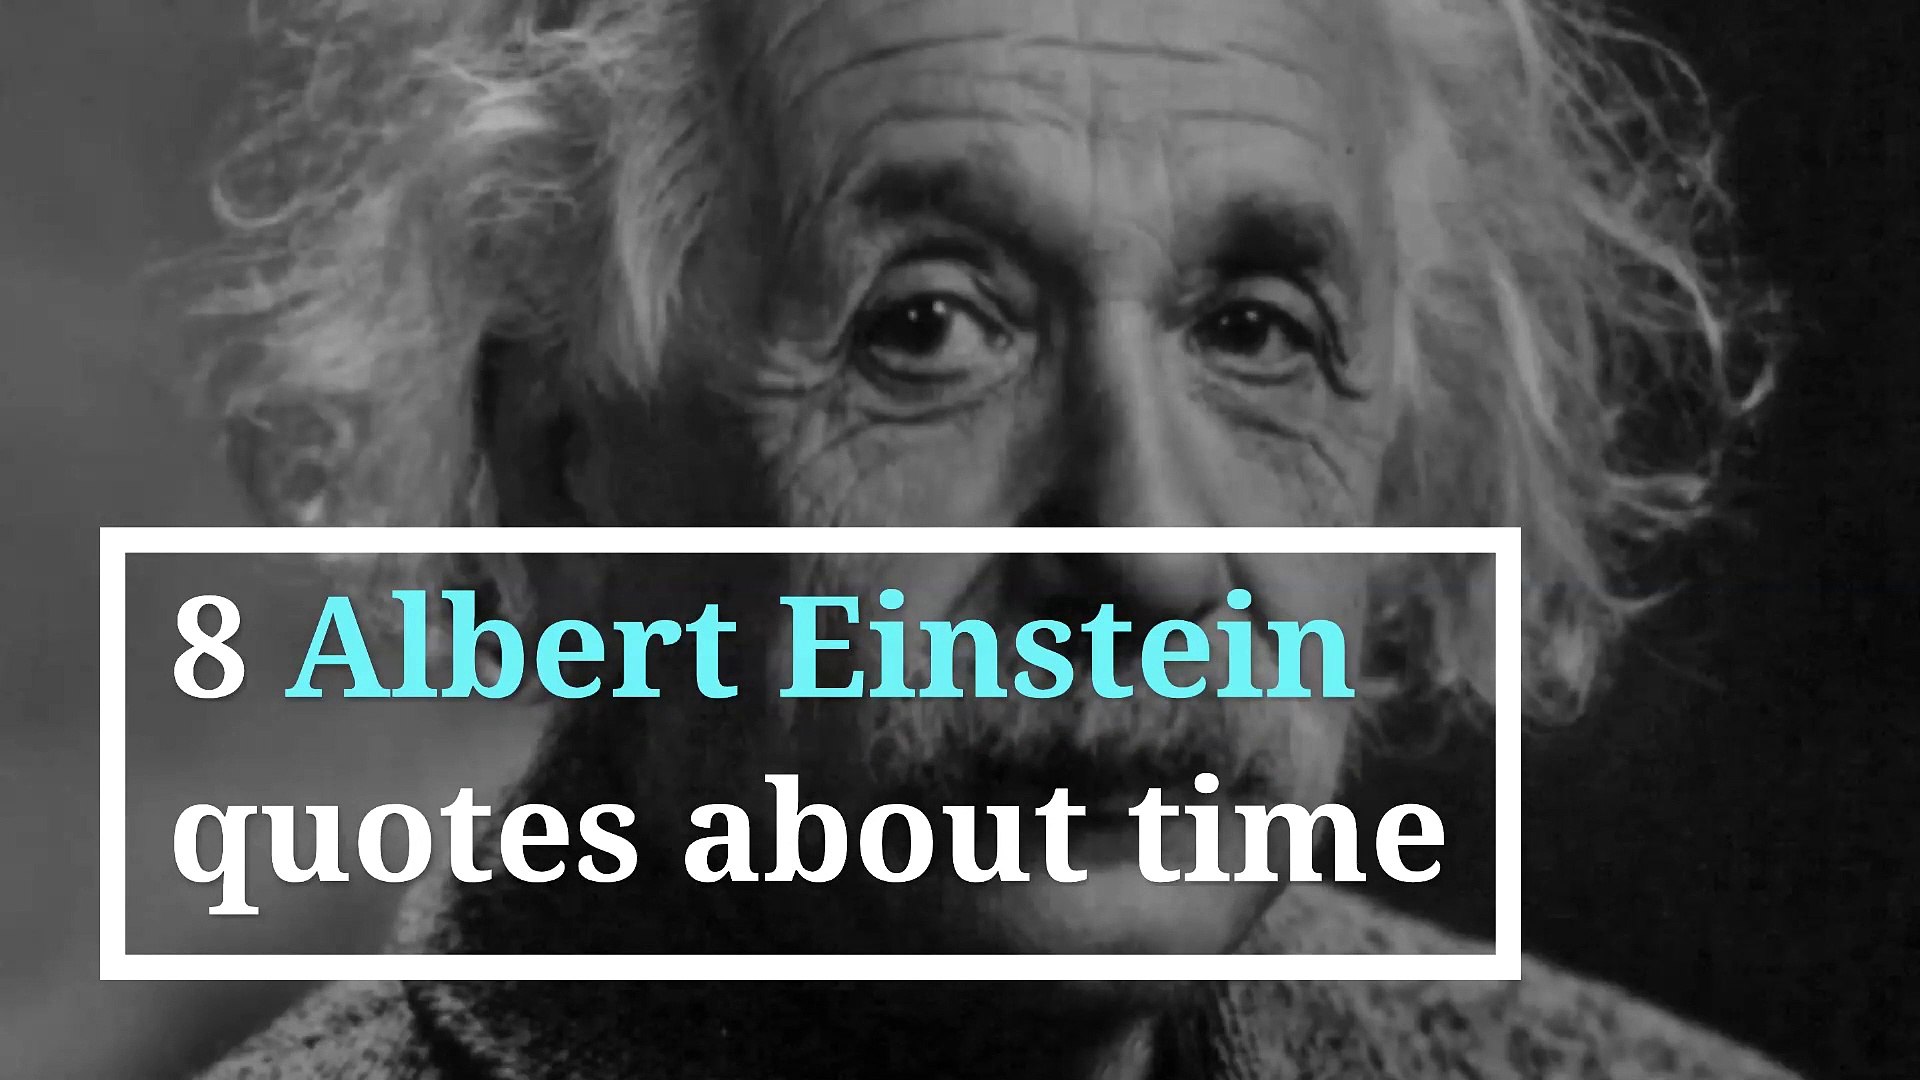 8 Albert Einstein quotes about time - video Dailymotion